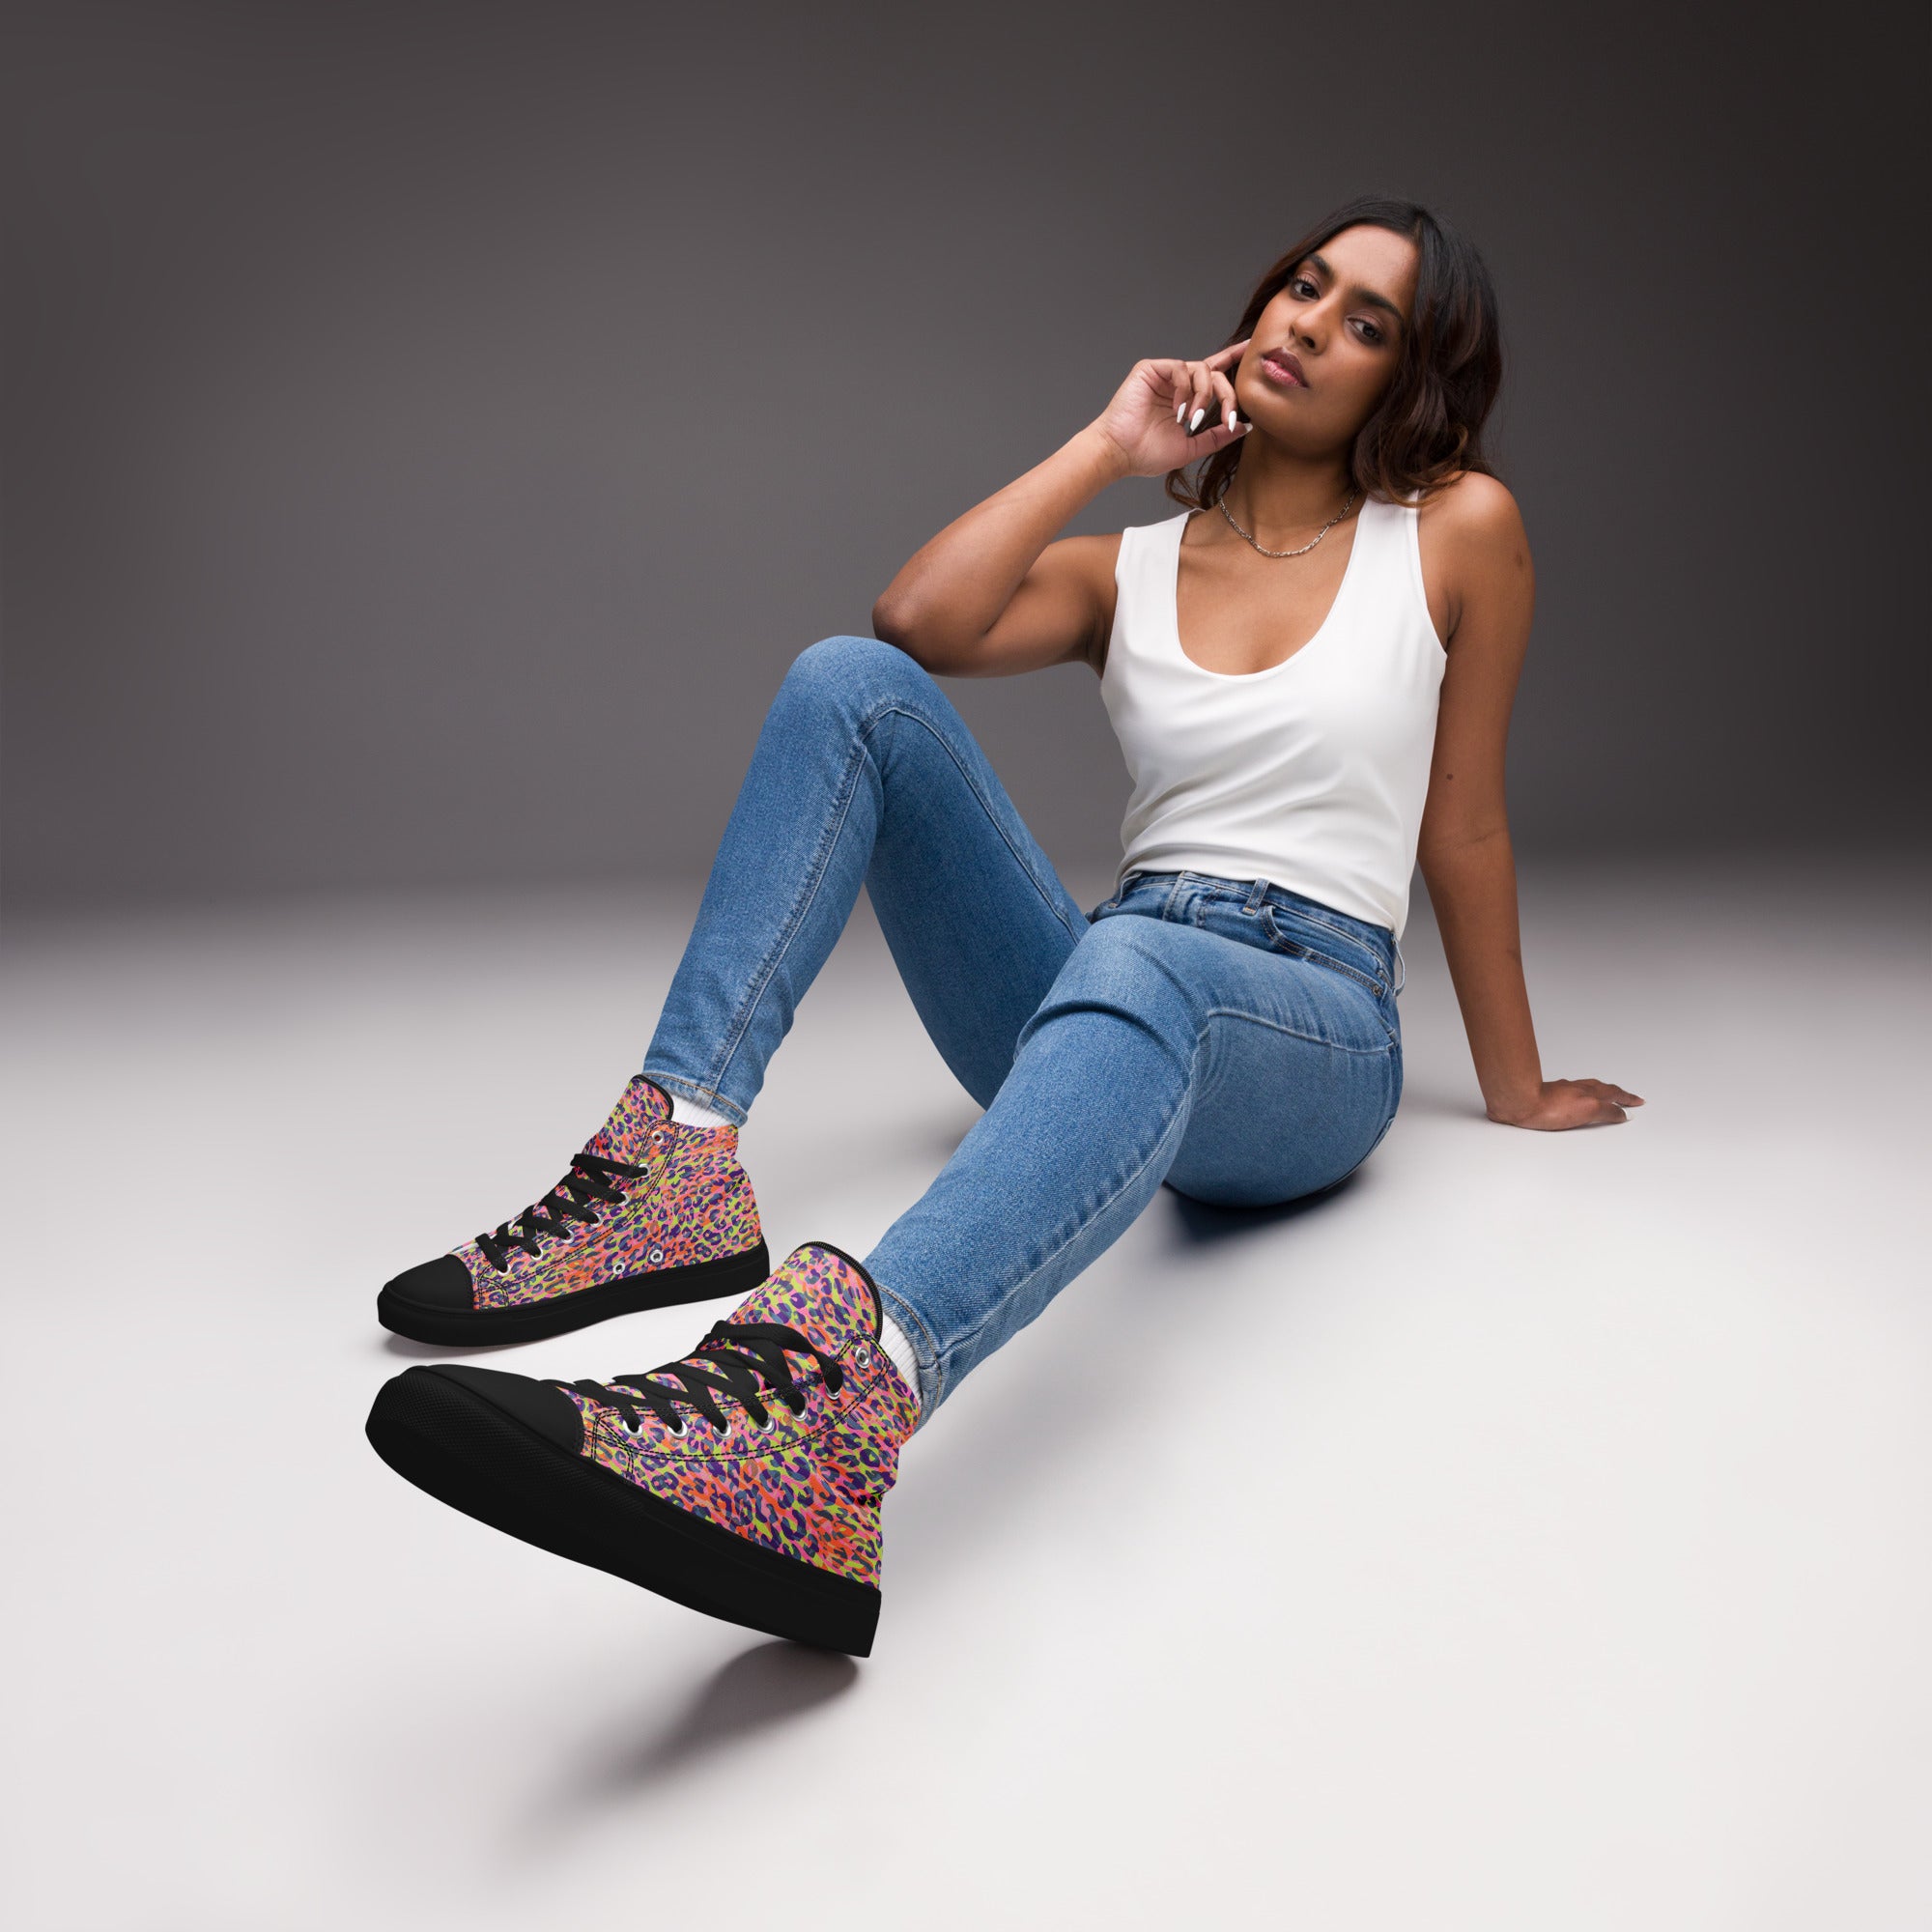 Women’s high top canvas shoes- Zebra and Leopard Print Orange with Yellow